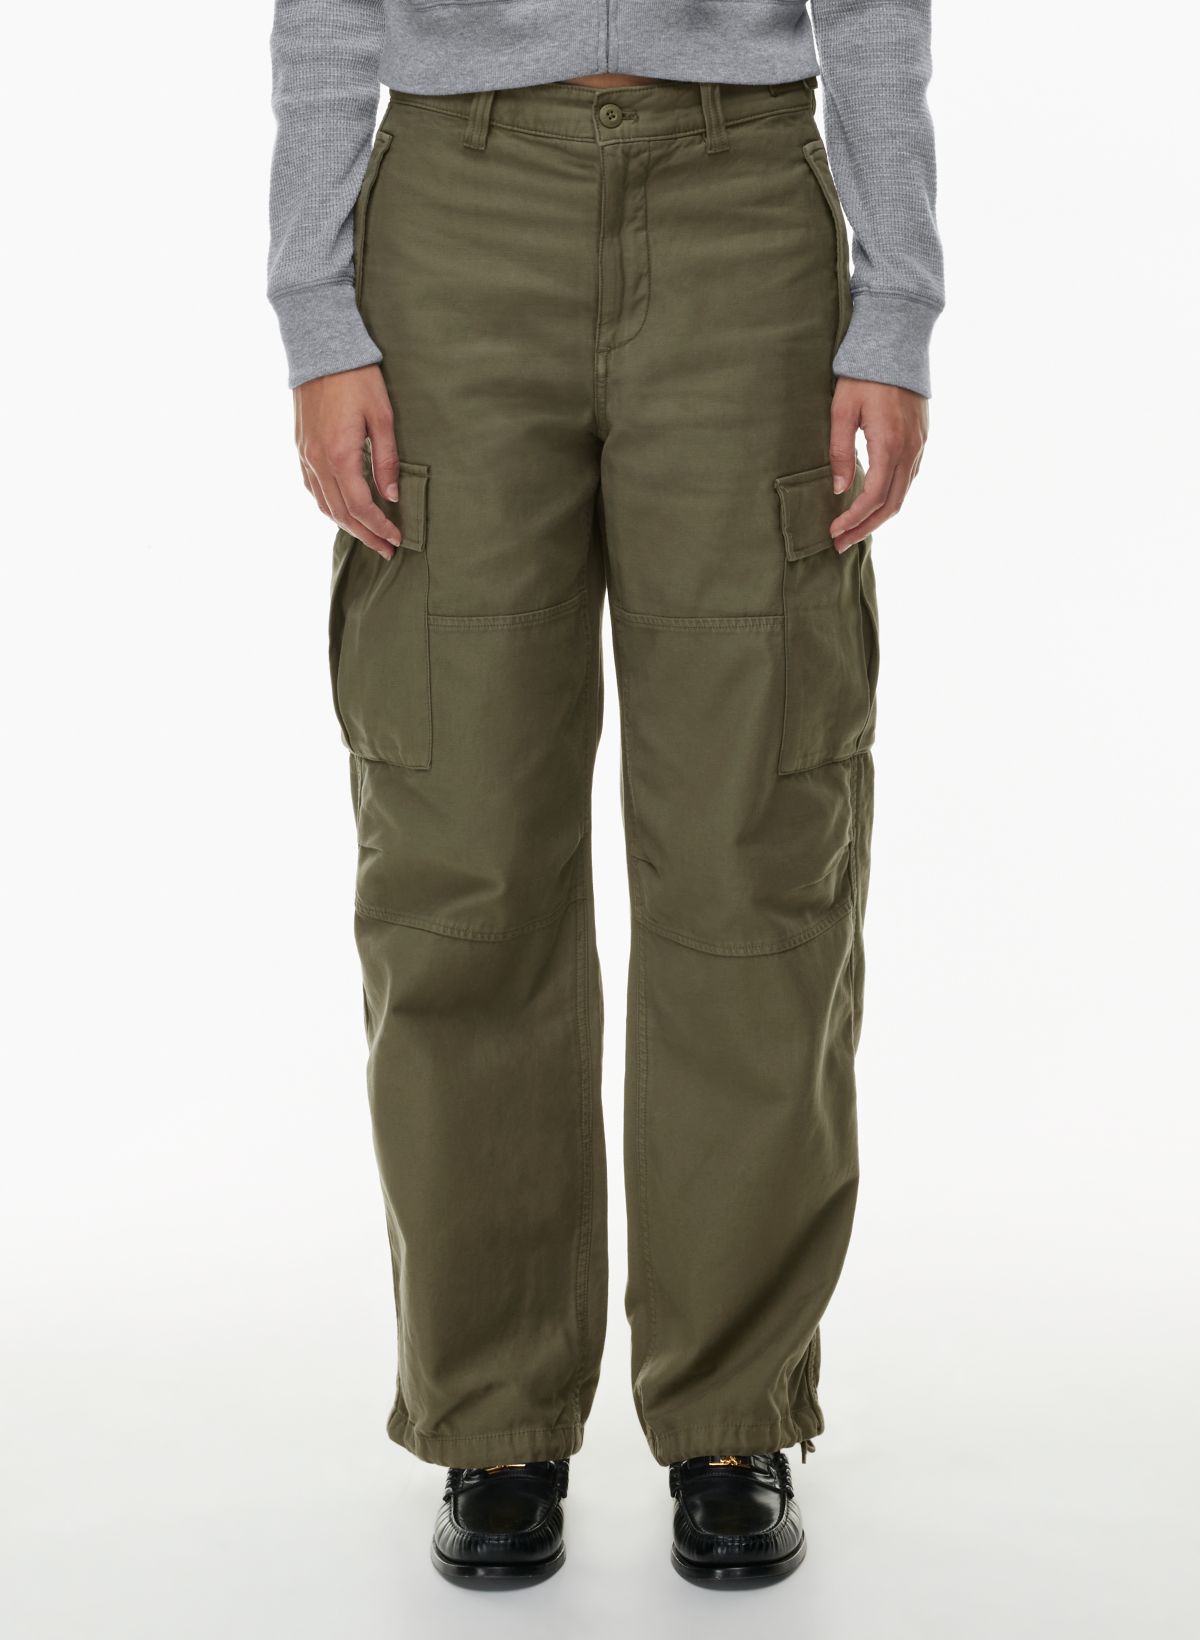 How to style cargo pants at 50 plus. - Notes From A Stylist